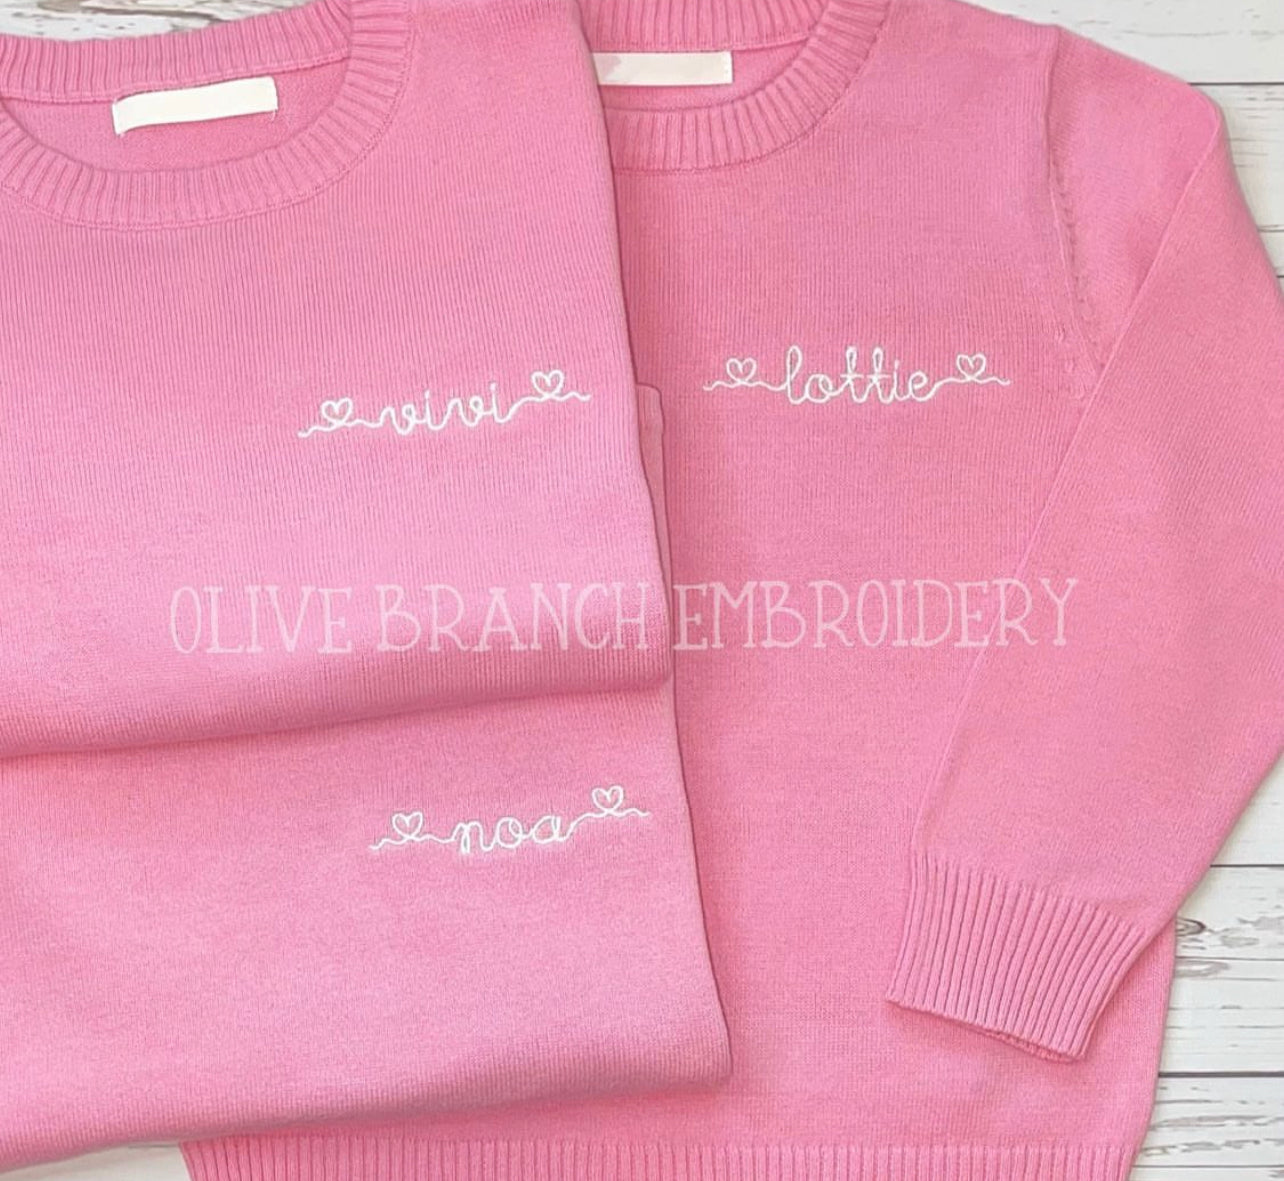 Children’s Sweater with Embroidery